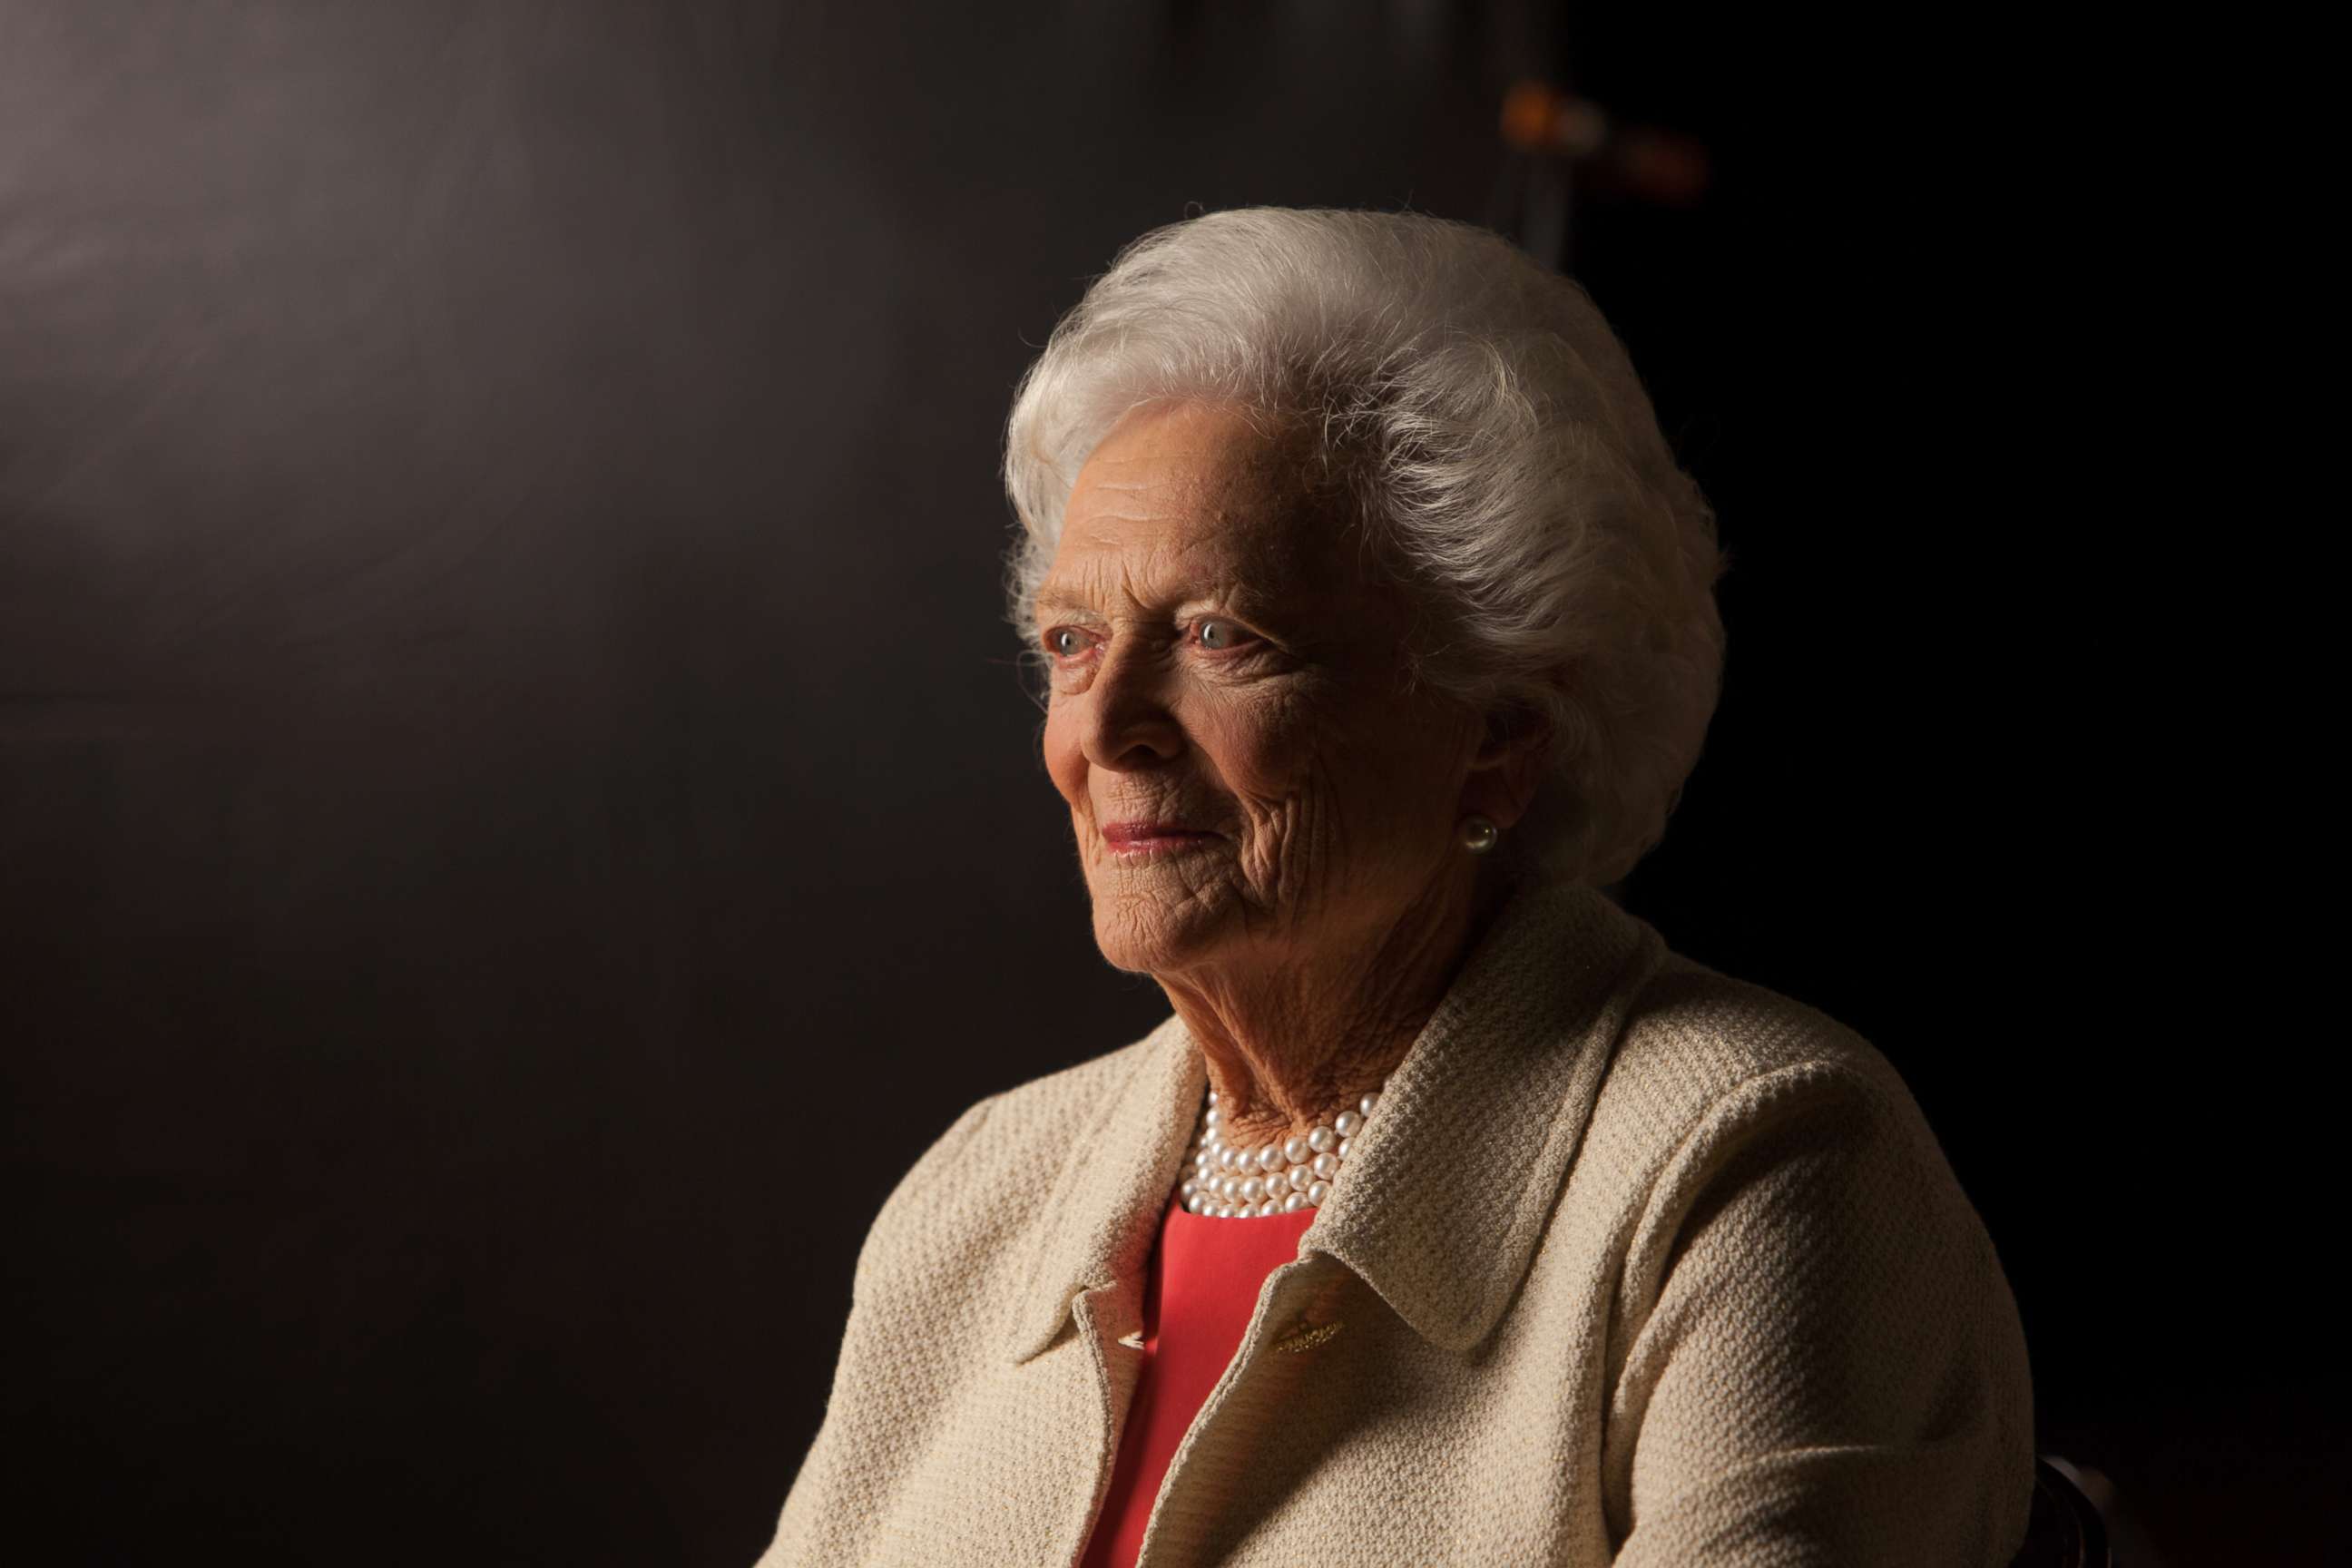 PHOTO: Former First Lady Barbara Bush is interviewed for 'The Presidents' Gatekeepers' project about the White House Chiefs of Staff at the Bush Library, Oct. 24, 2011 in College Station, Texas.